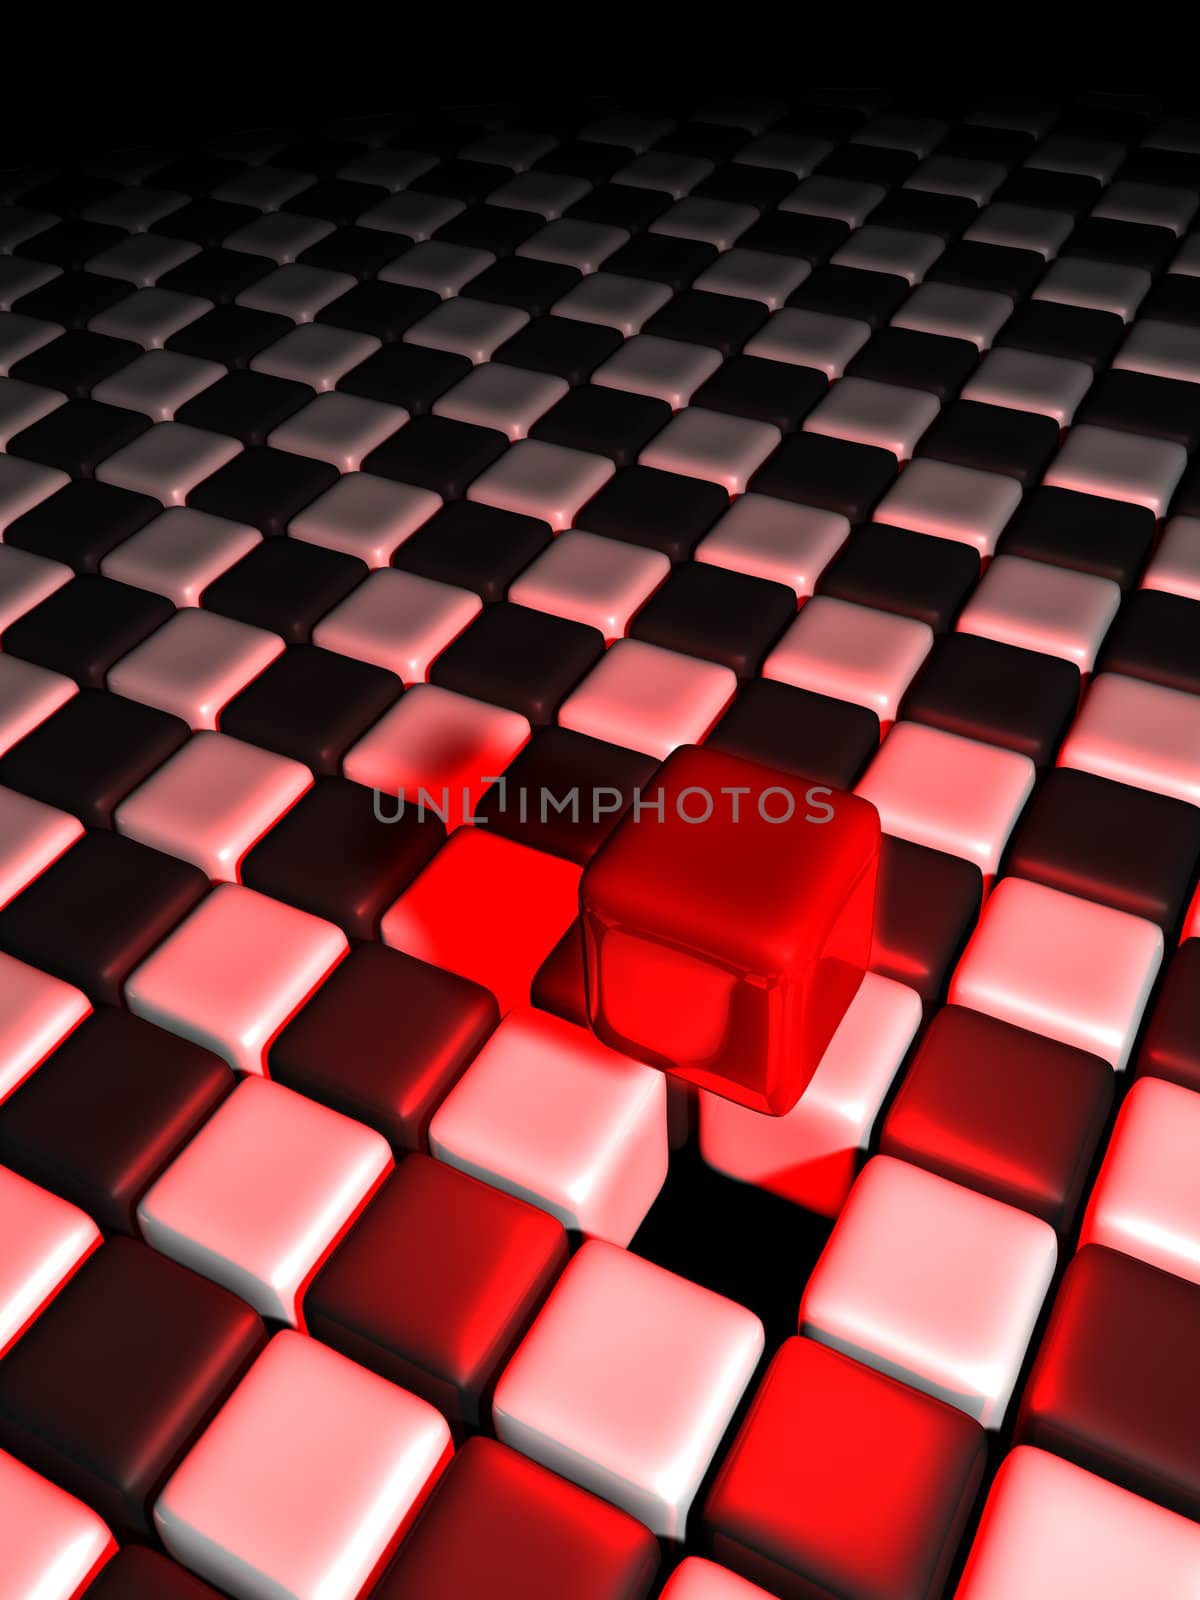 Red cube alone above many black and white cubes by shkyo30